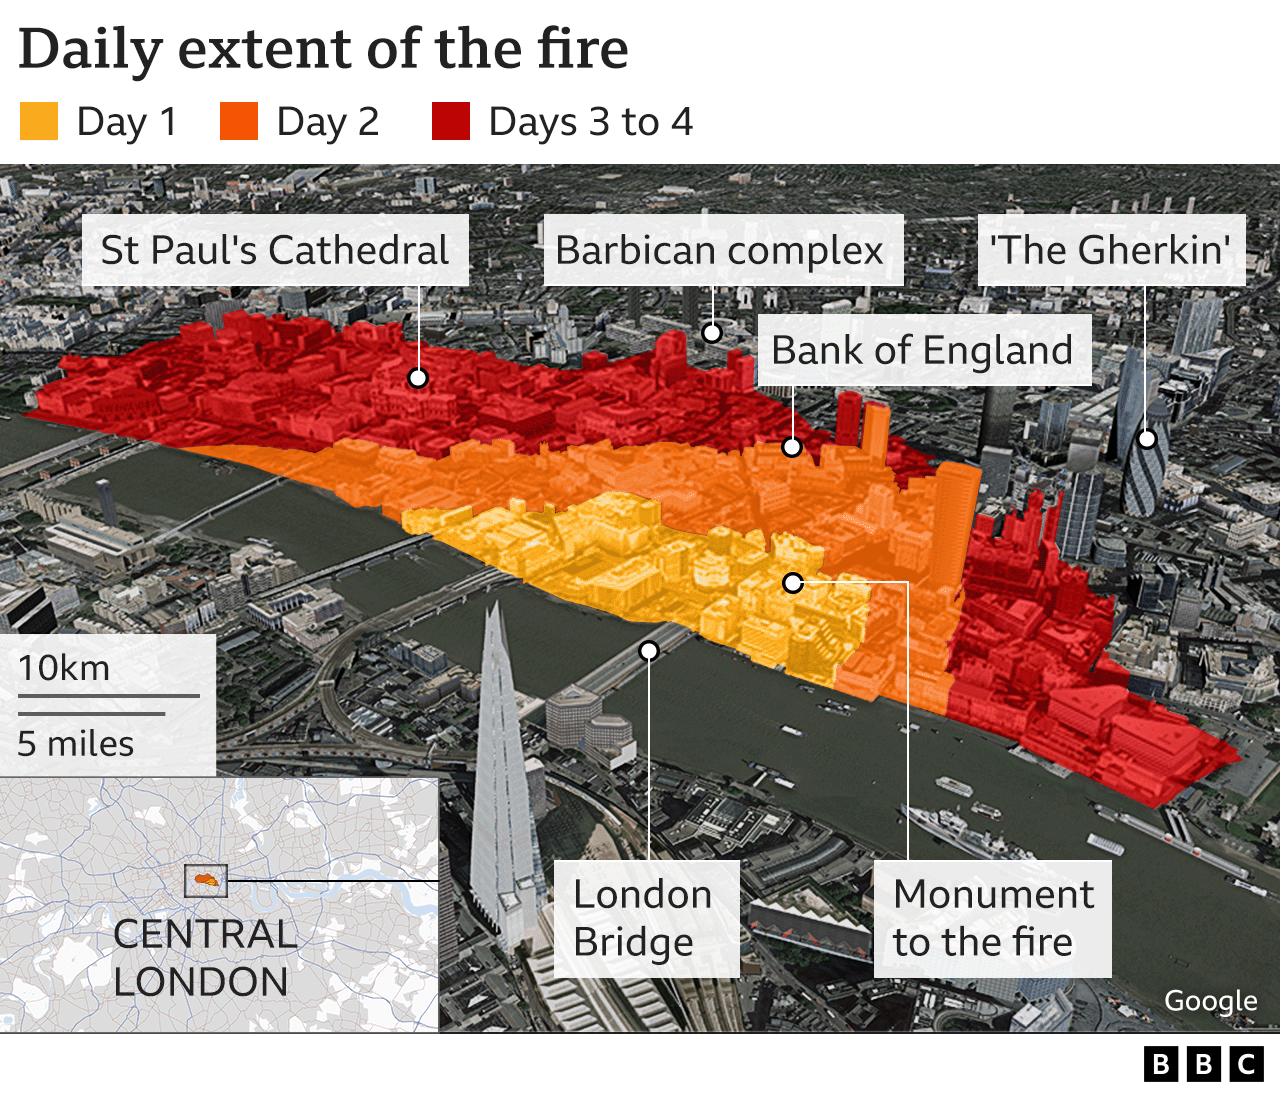 Map shows how the fire spread in London over several days